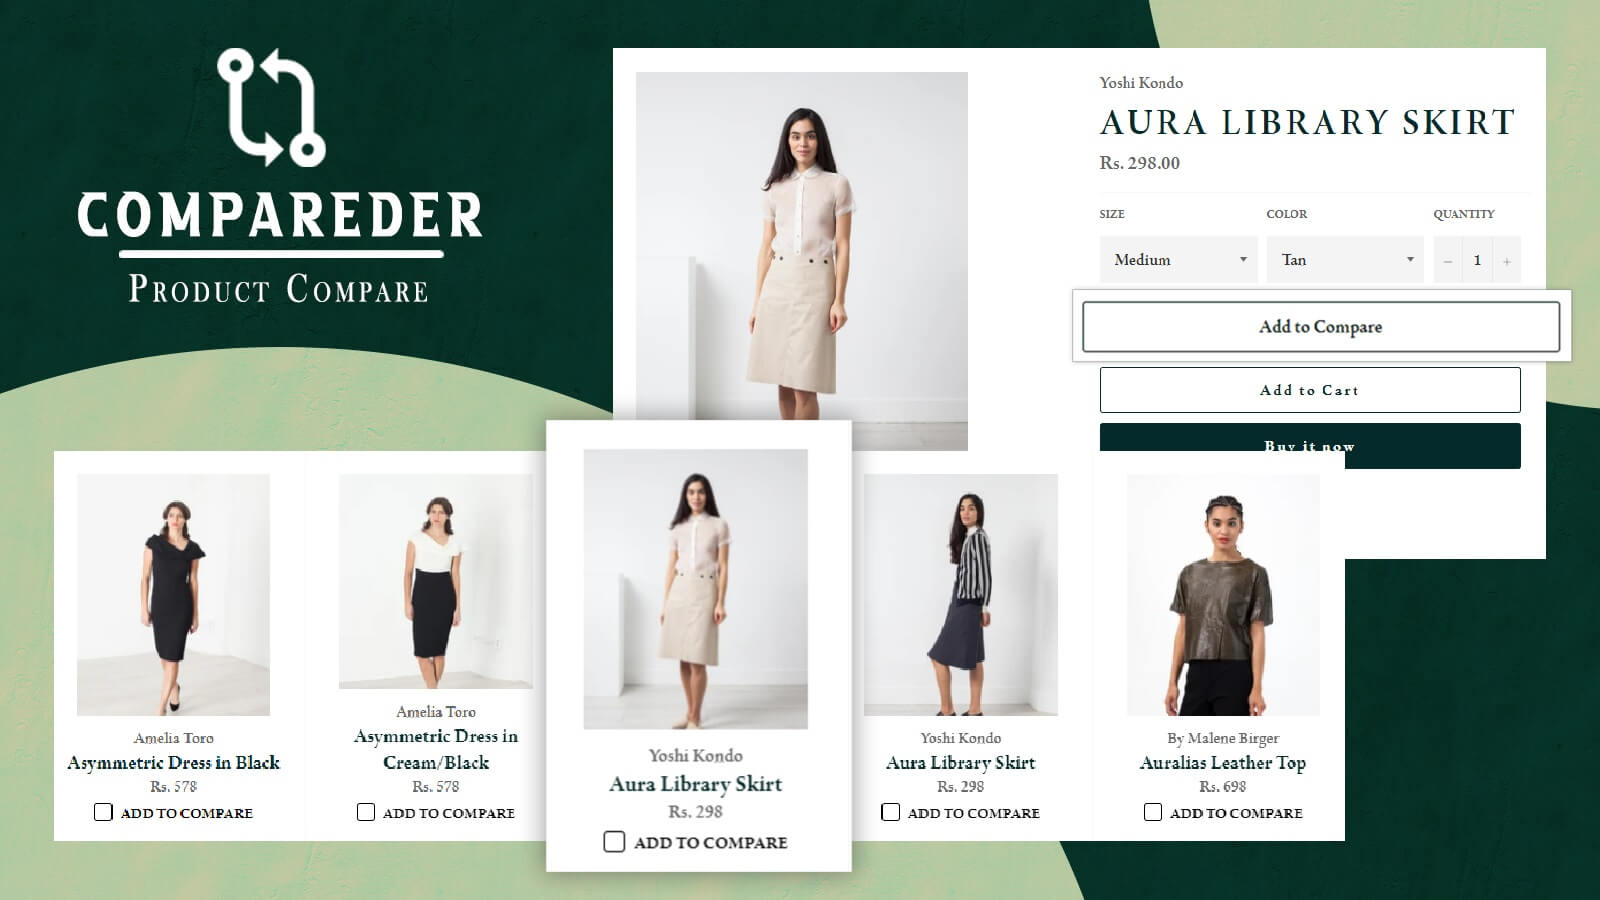 Want a sleek comparison widget? Compareder is one of the top Shopify compare apps